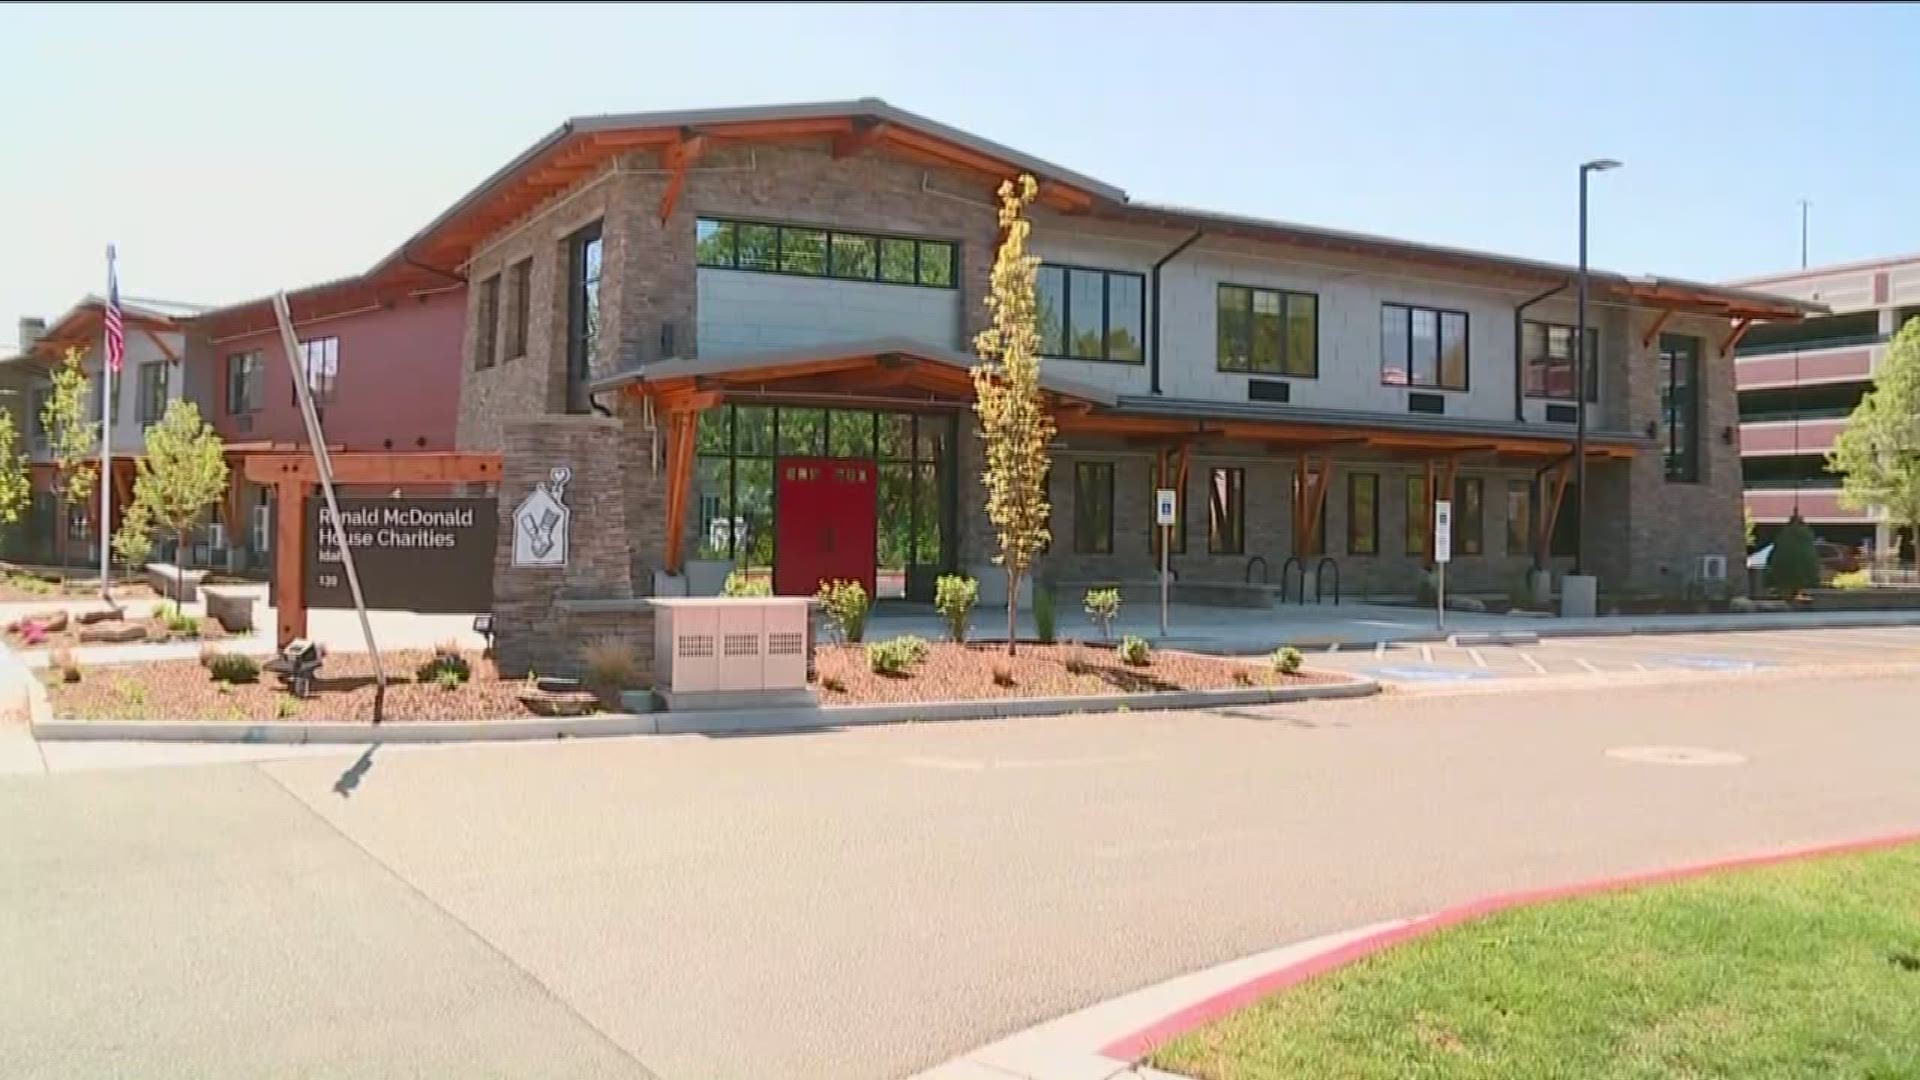 The Ronald McDonald House keeps families together during difficult times.